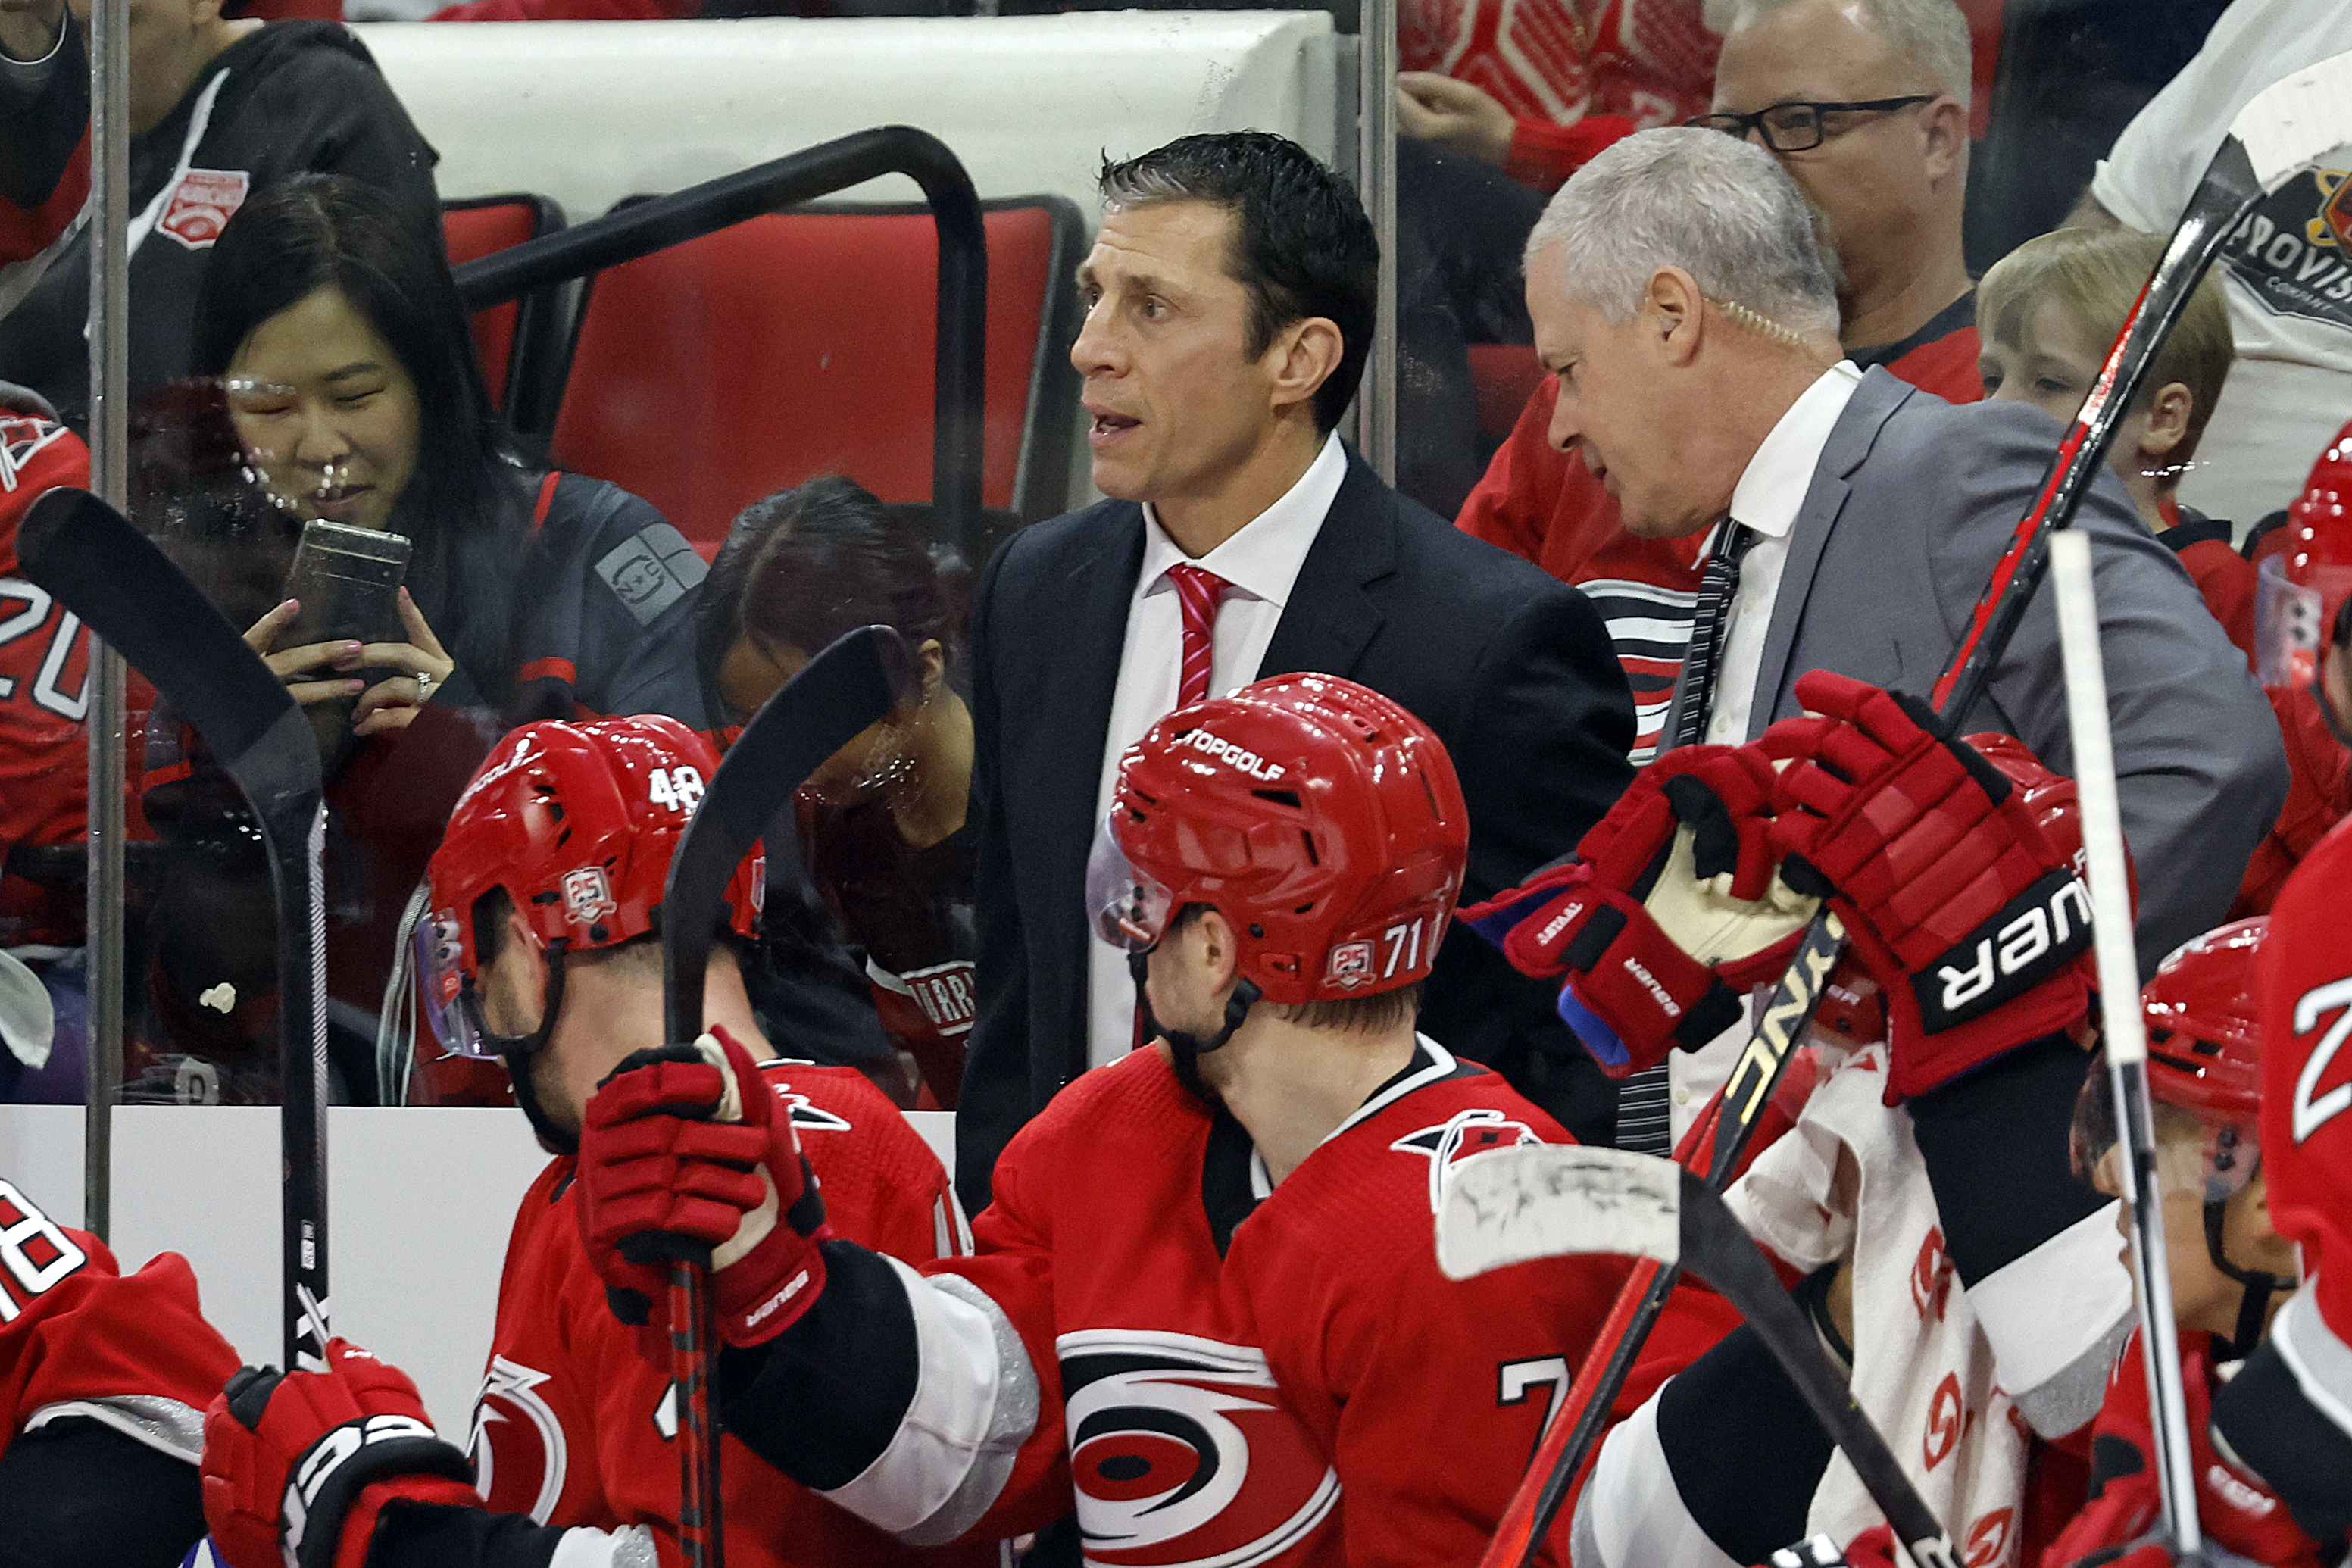 Hurricanes coach Brind'Amour 'moving on' after fined by NHL